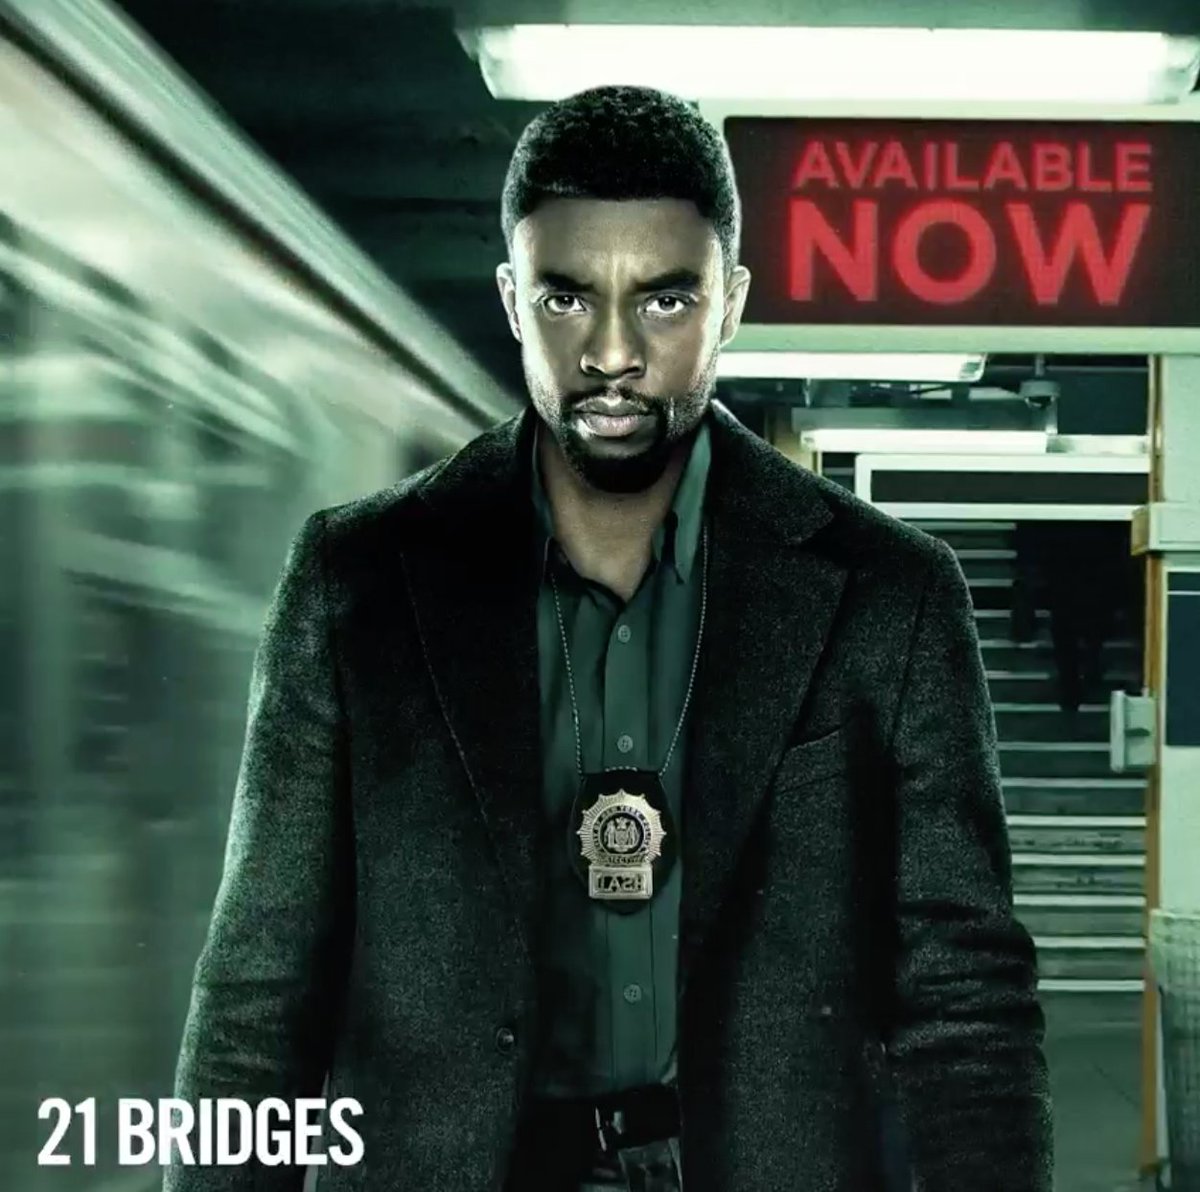 Feel the adrenaline rush in #21Bridges with @ChadwickBoseman, watch now on @Showtime